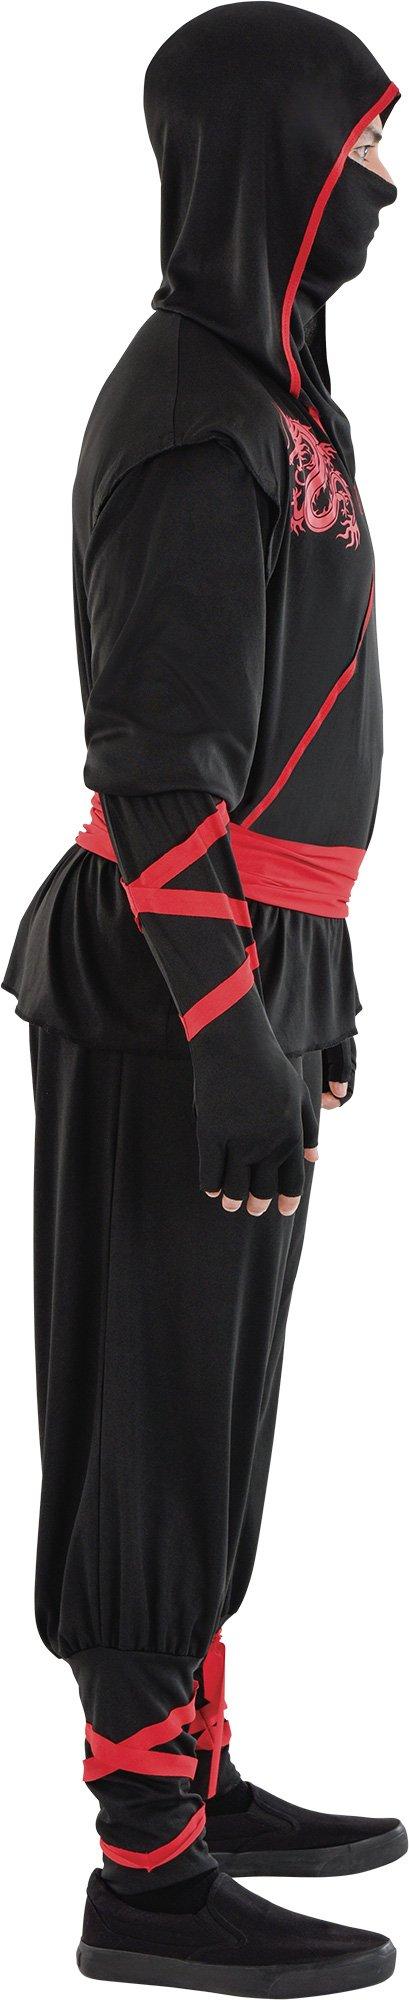 Ninja Assassin Creed Costume In Black And Red